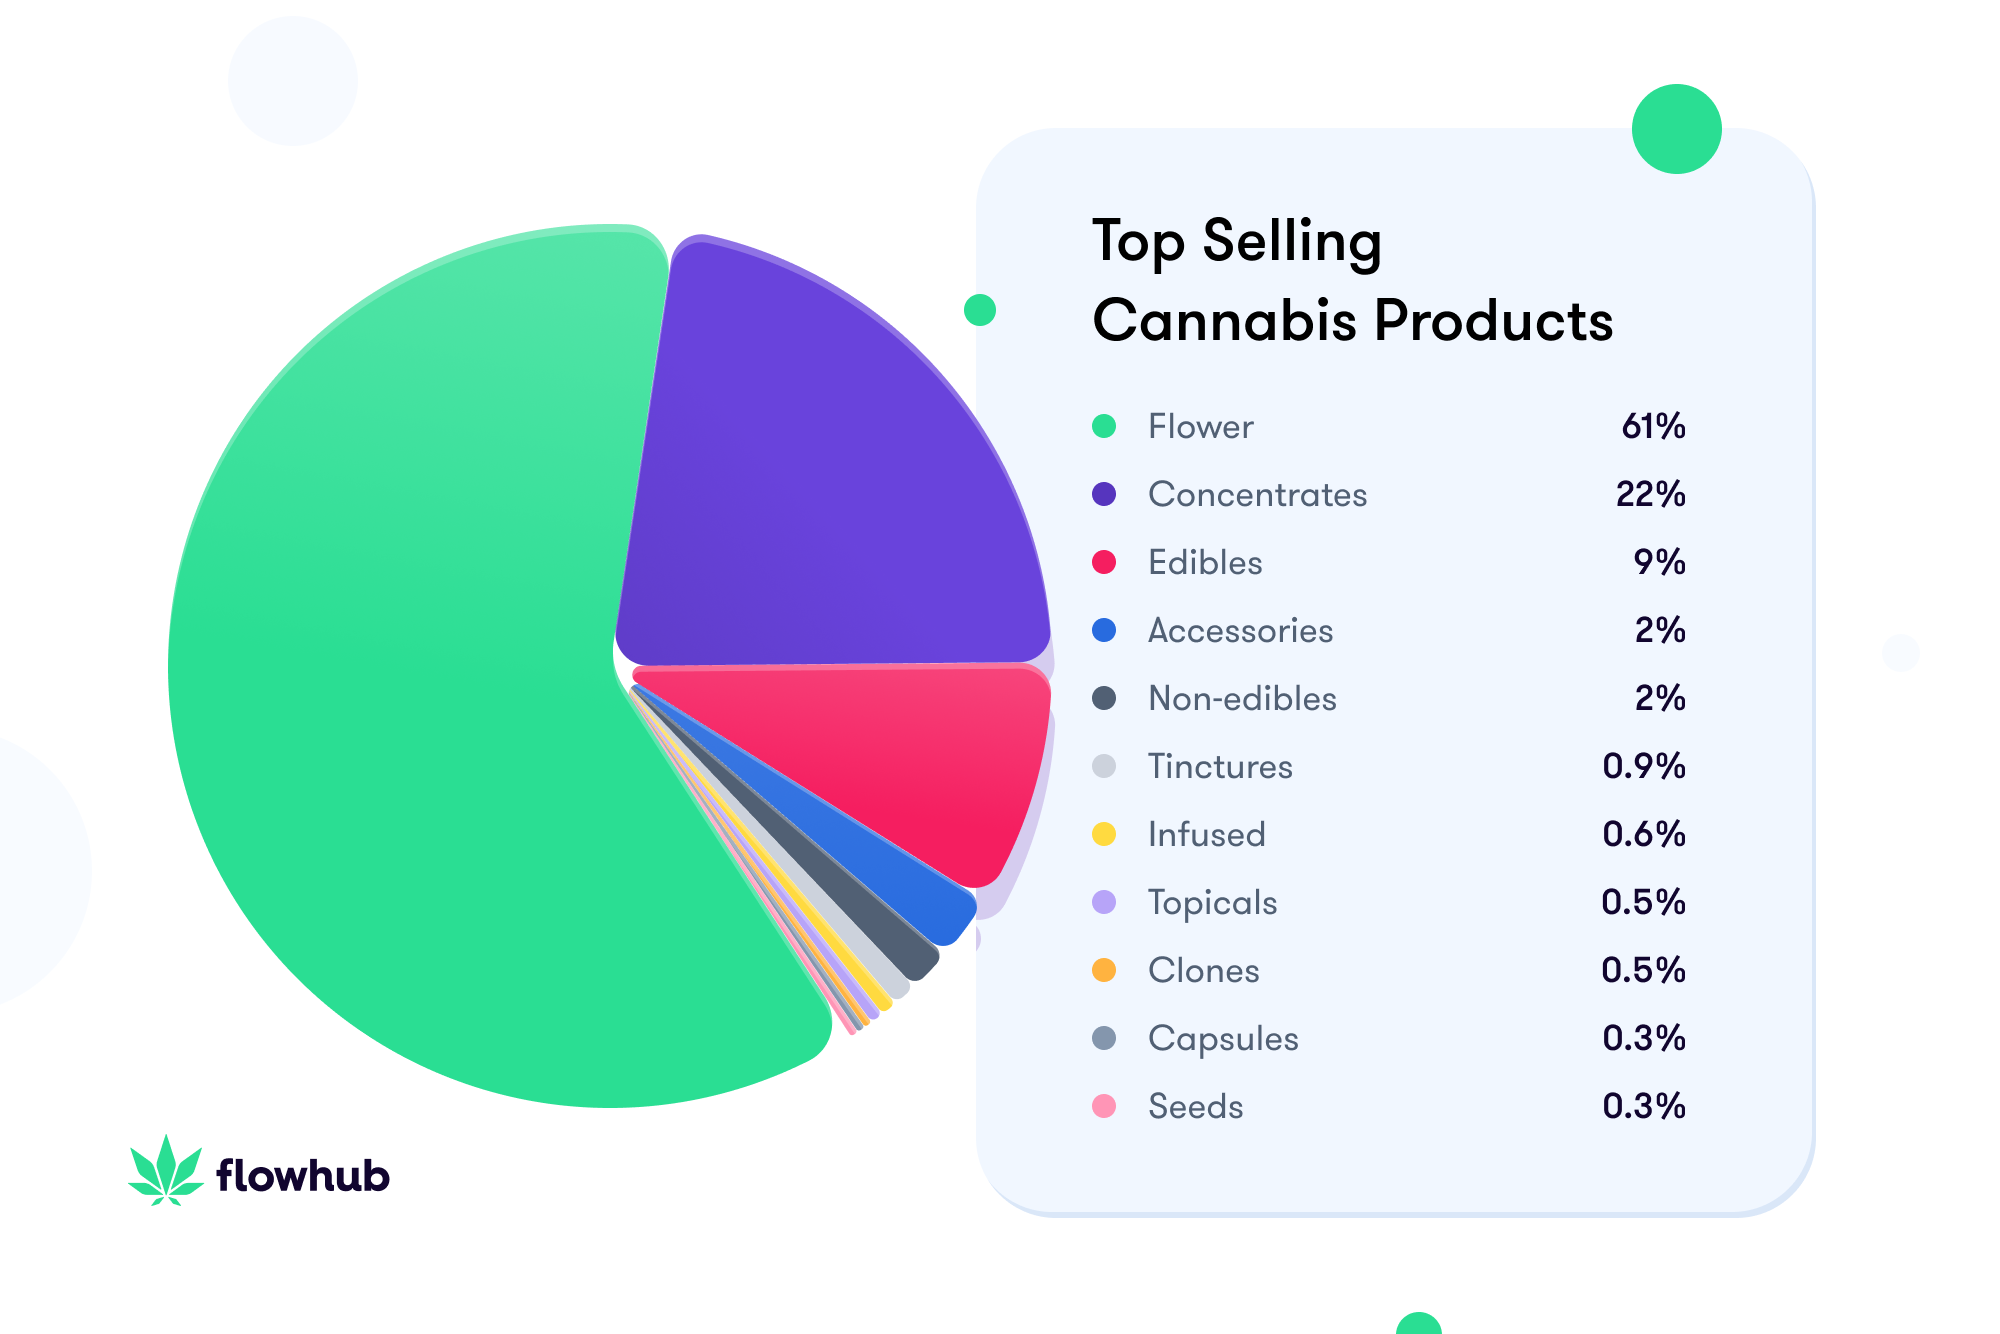 Top selling cannabis products